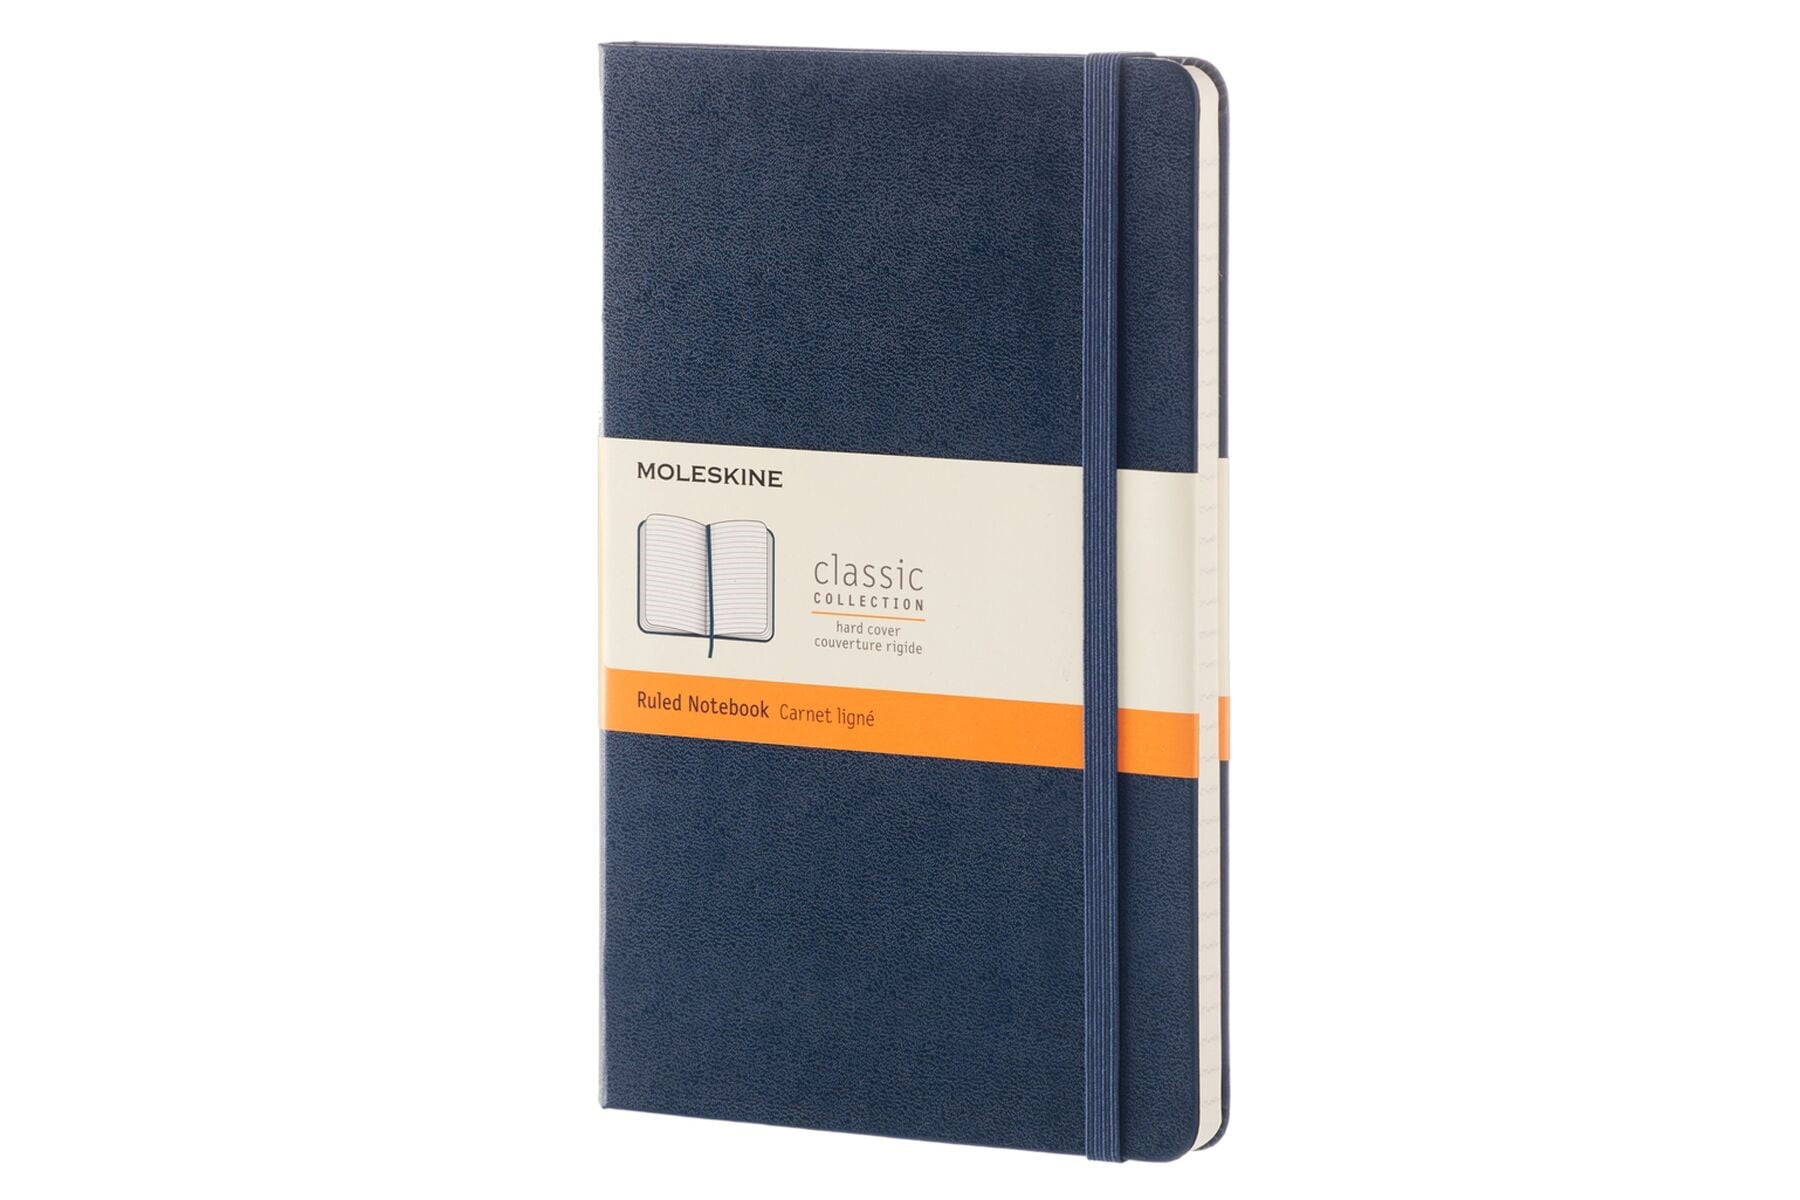 Moleskine Classic Notebook Sapphire Ruled/Lined Hard Cover 5" x 8.25" Large 